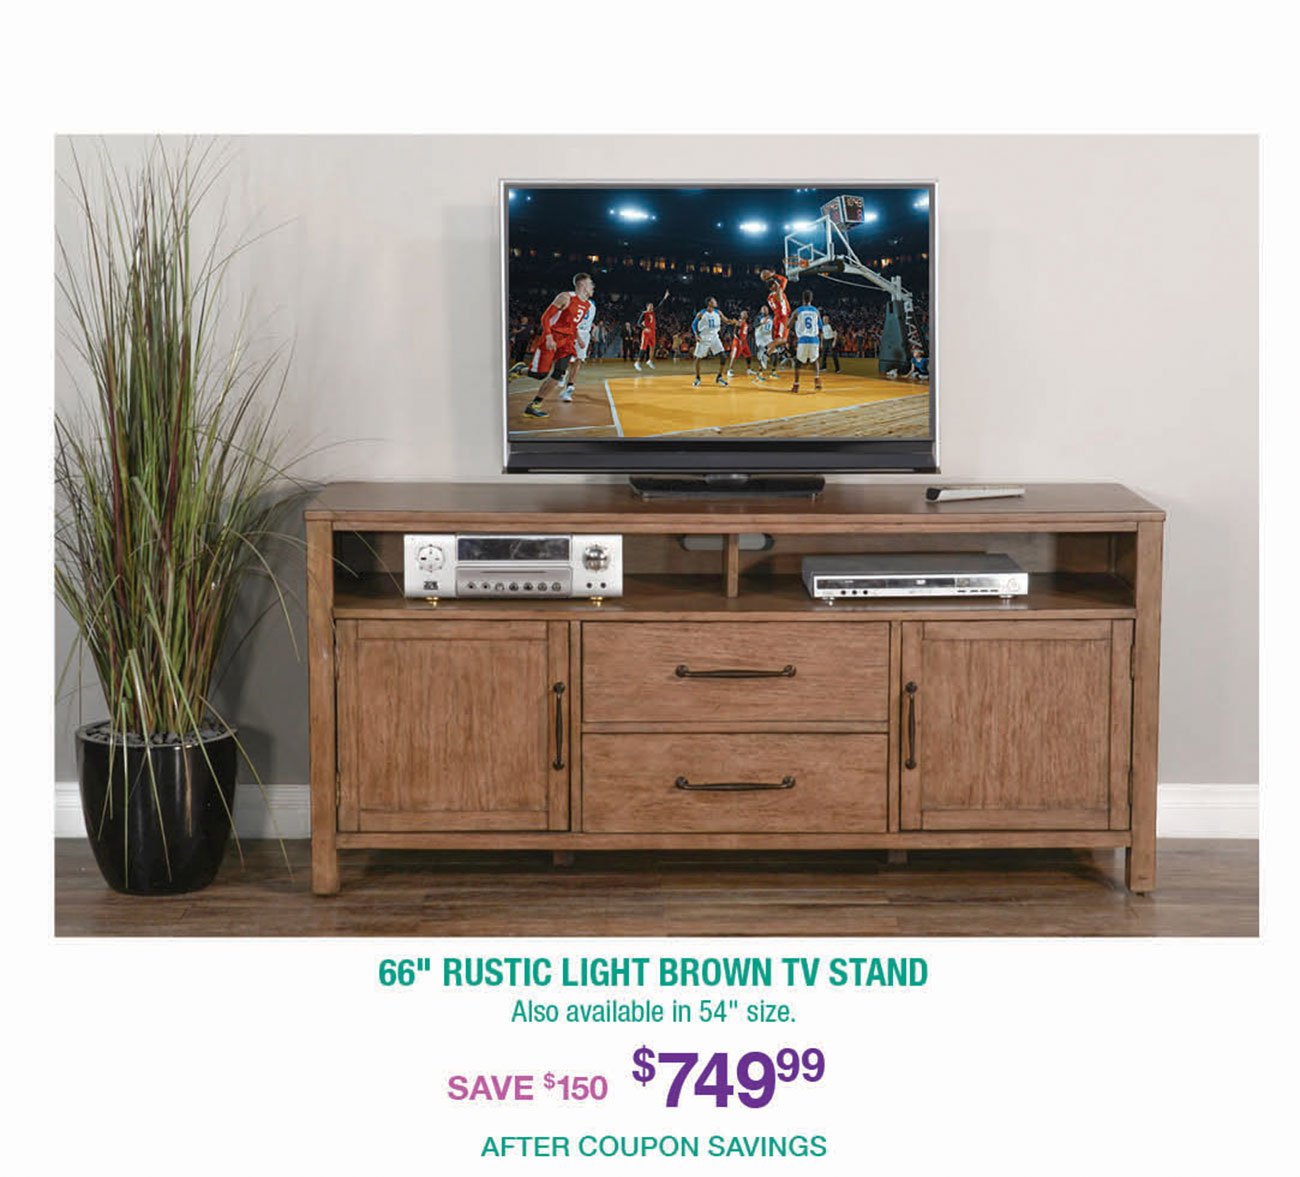 Rustic-Light-Brown-TV-Stand